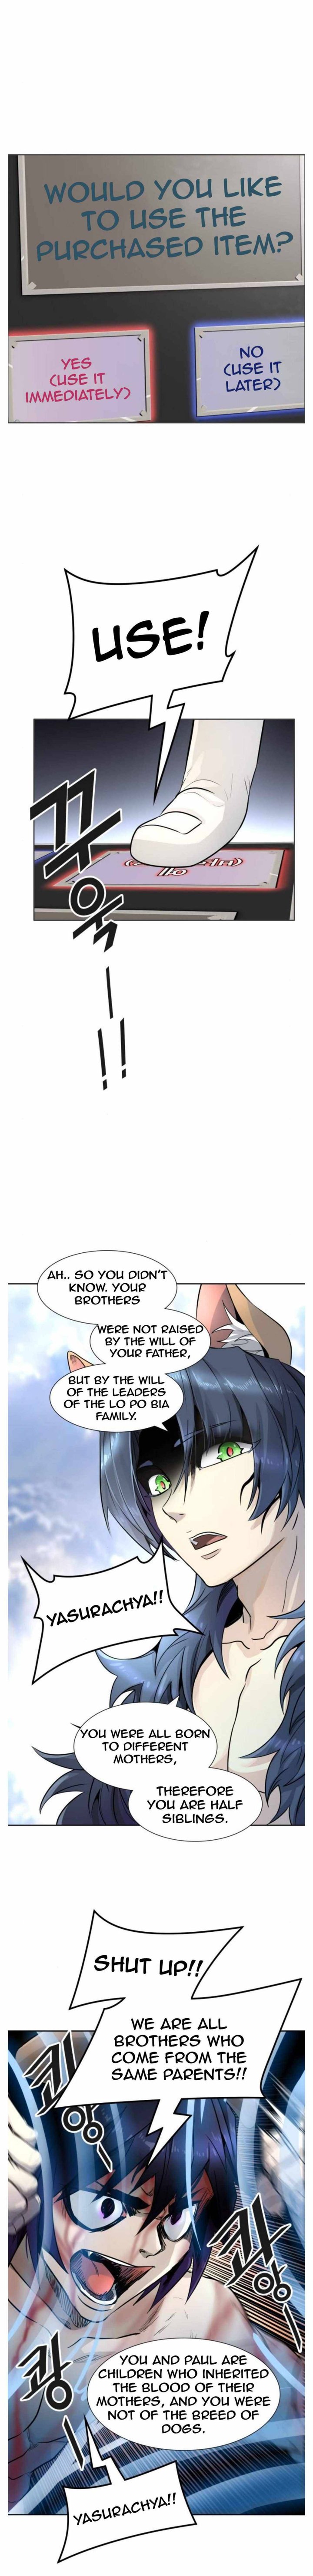 Tower Of God 501 11